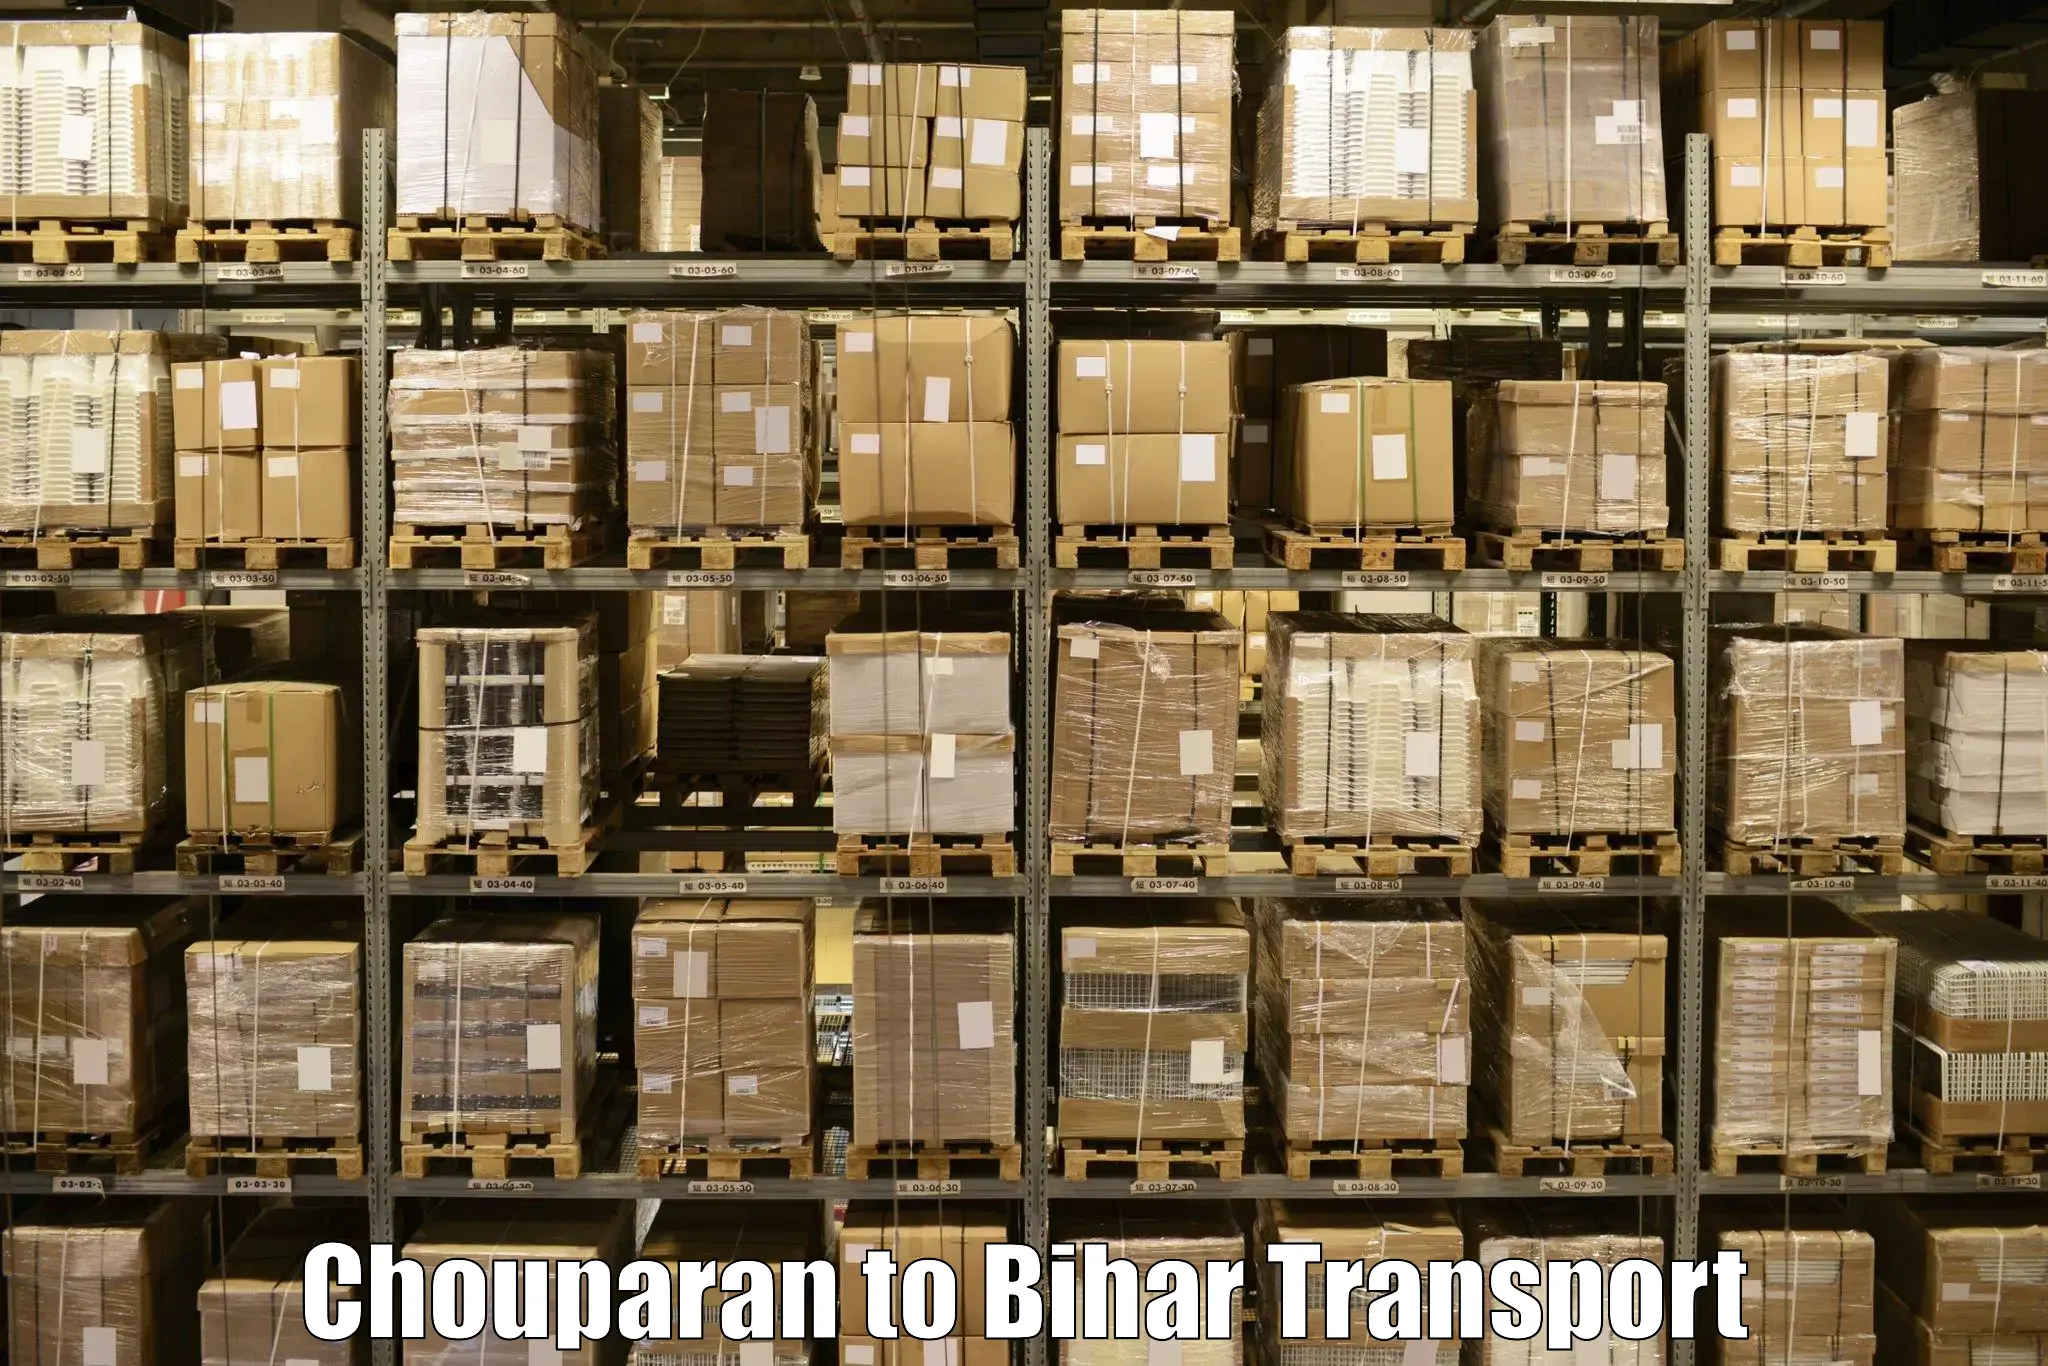 Air freight transport services Chouparan to Bankipore